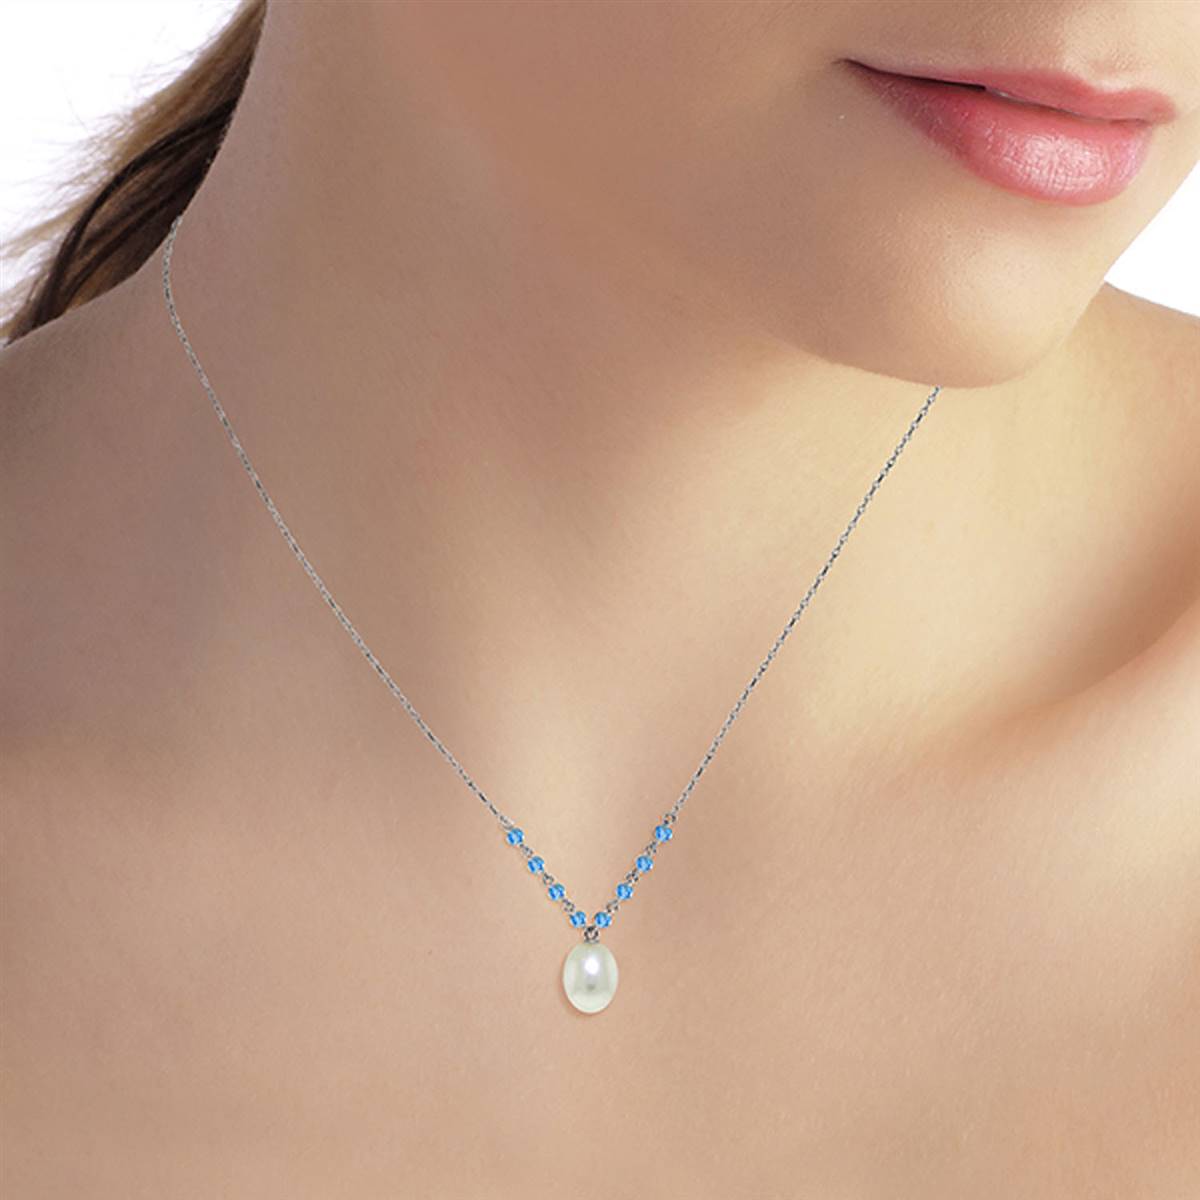 5 Carat 14K Solid White Gold Necklace Natural Blue Topaz Pearl